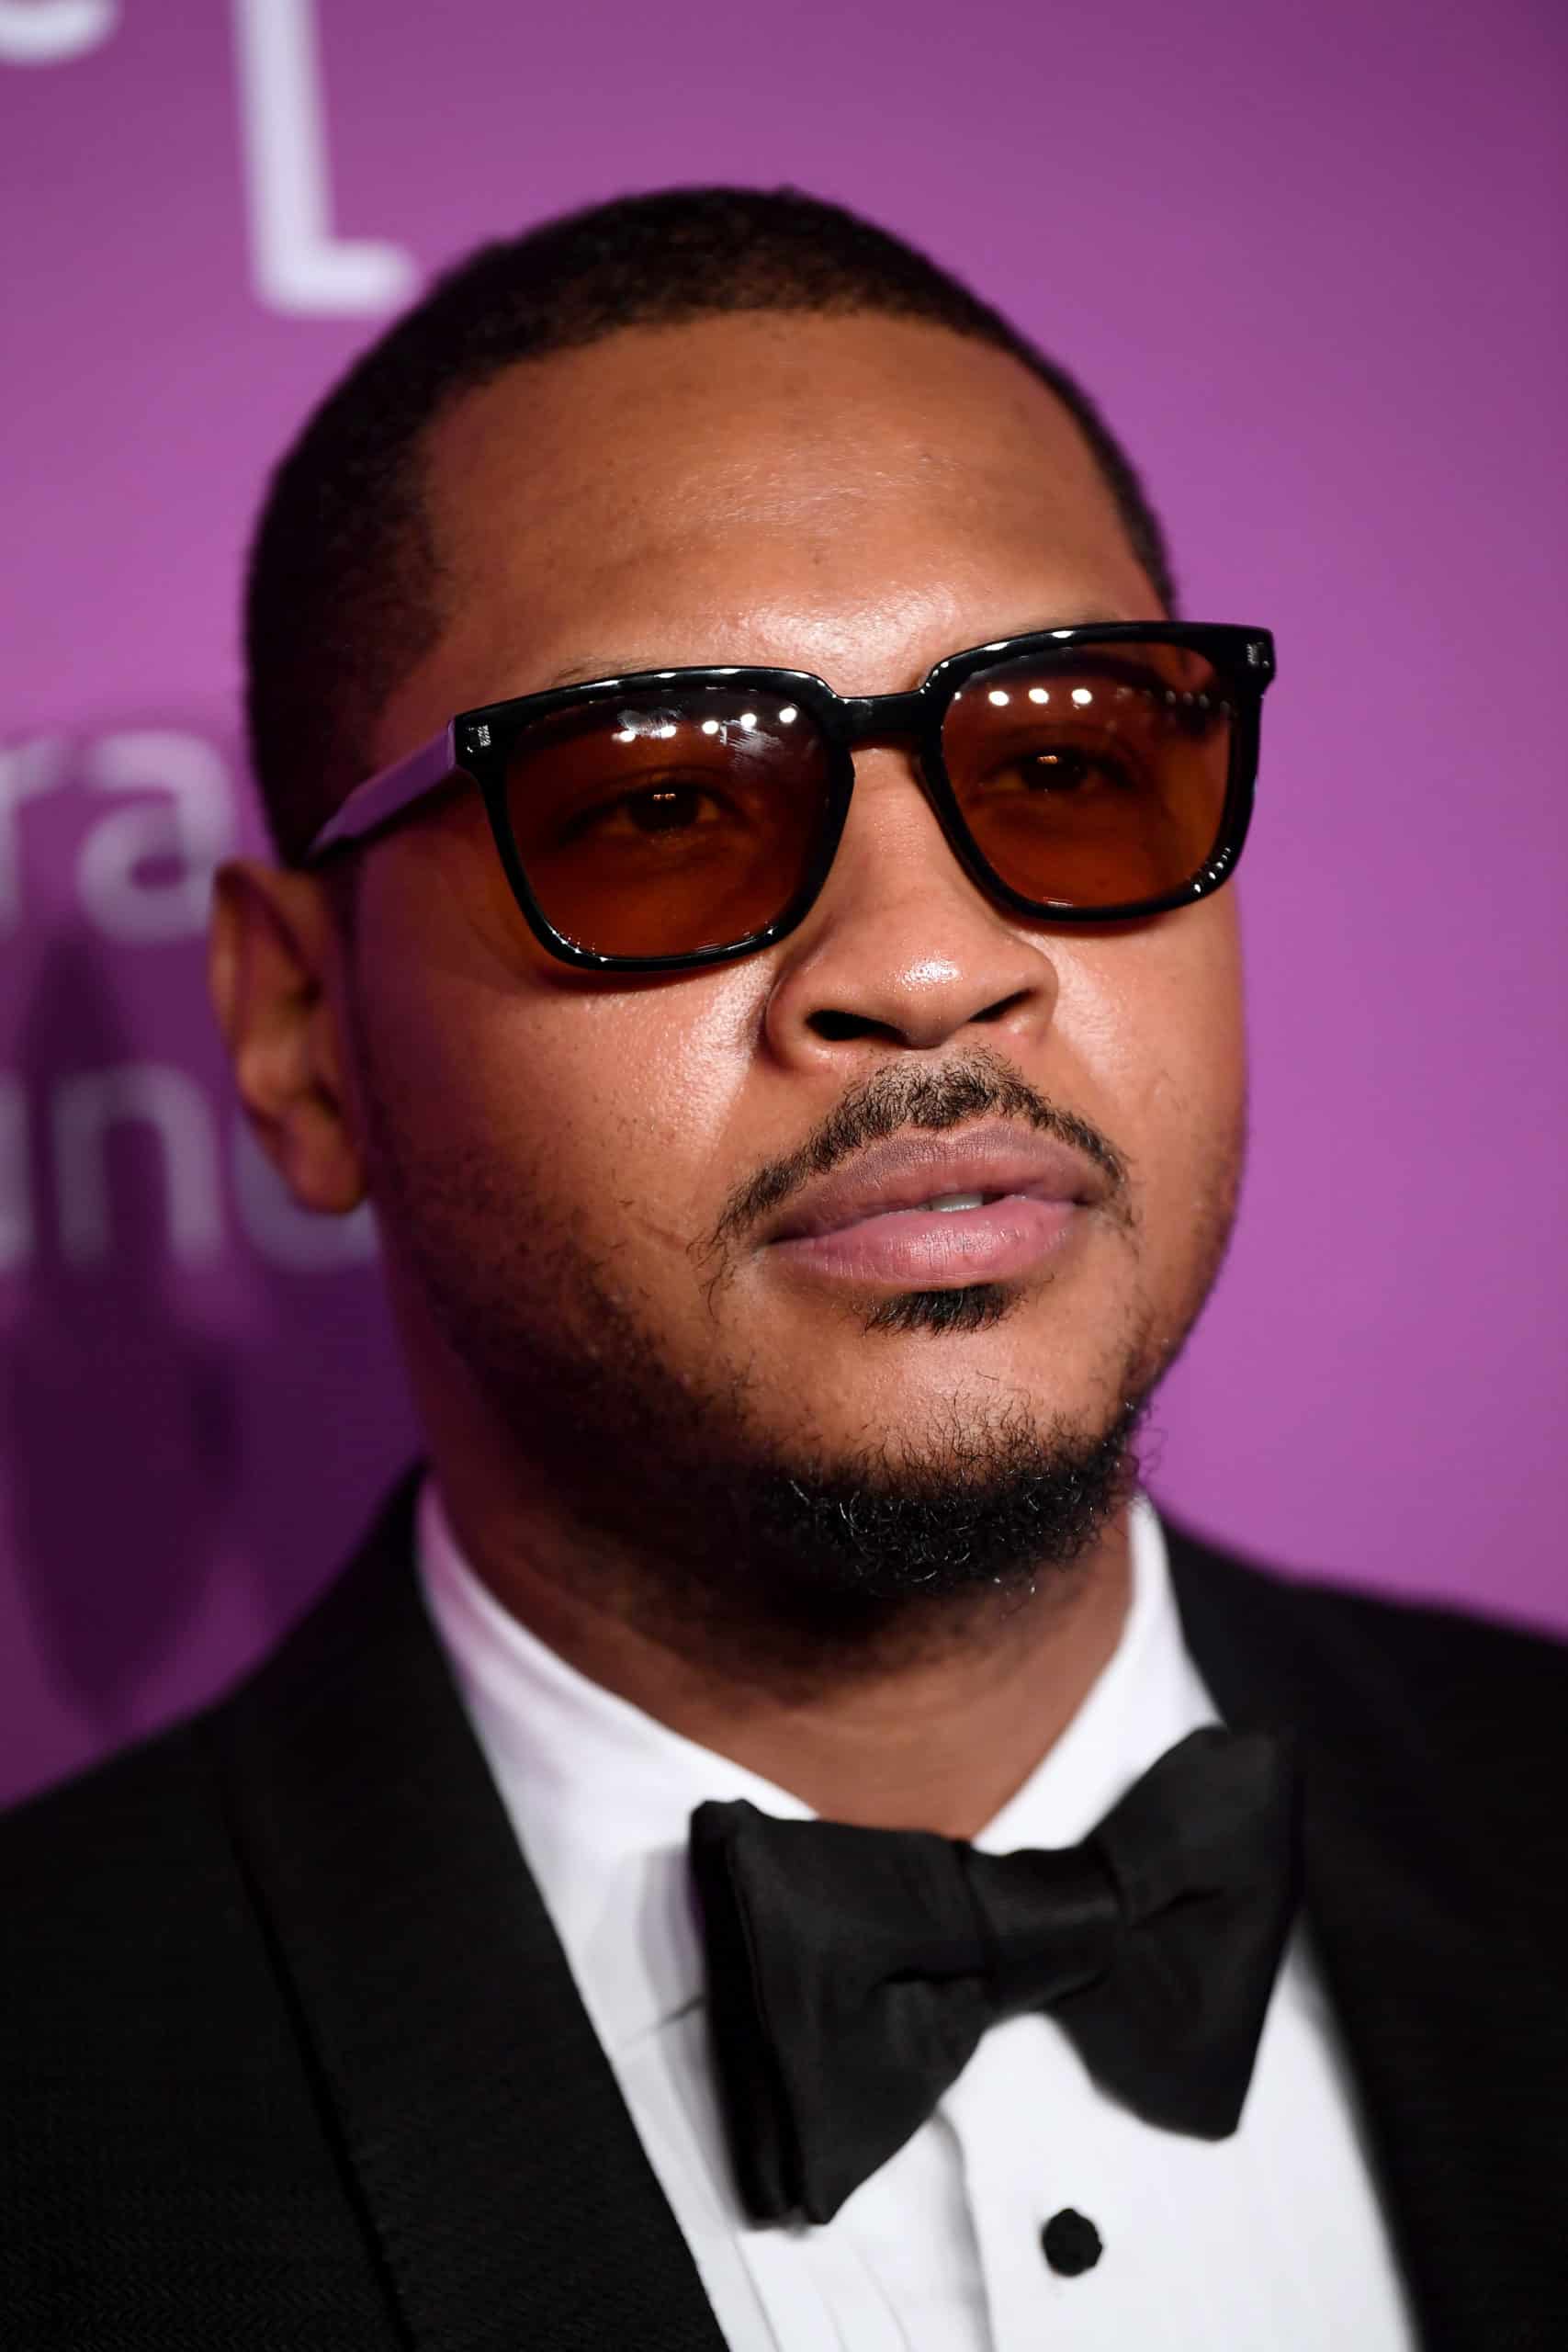 Woman Alleges Carmelo Anthony Is The Father Of Her Newborn Twins